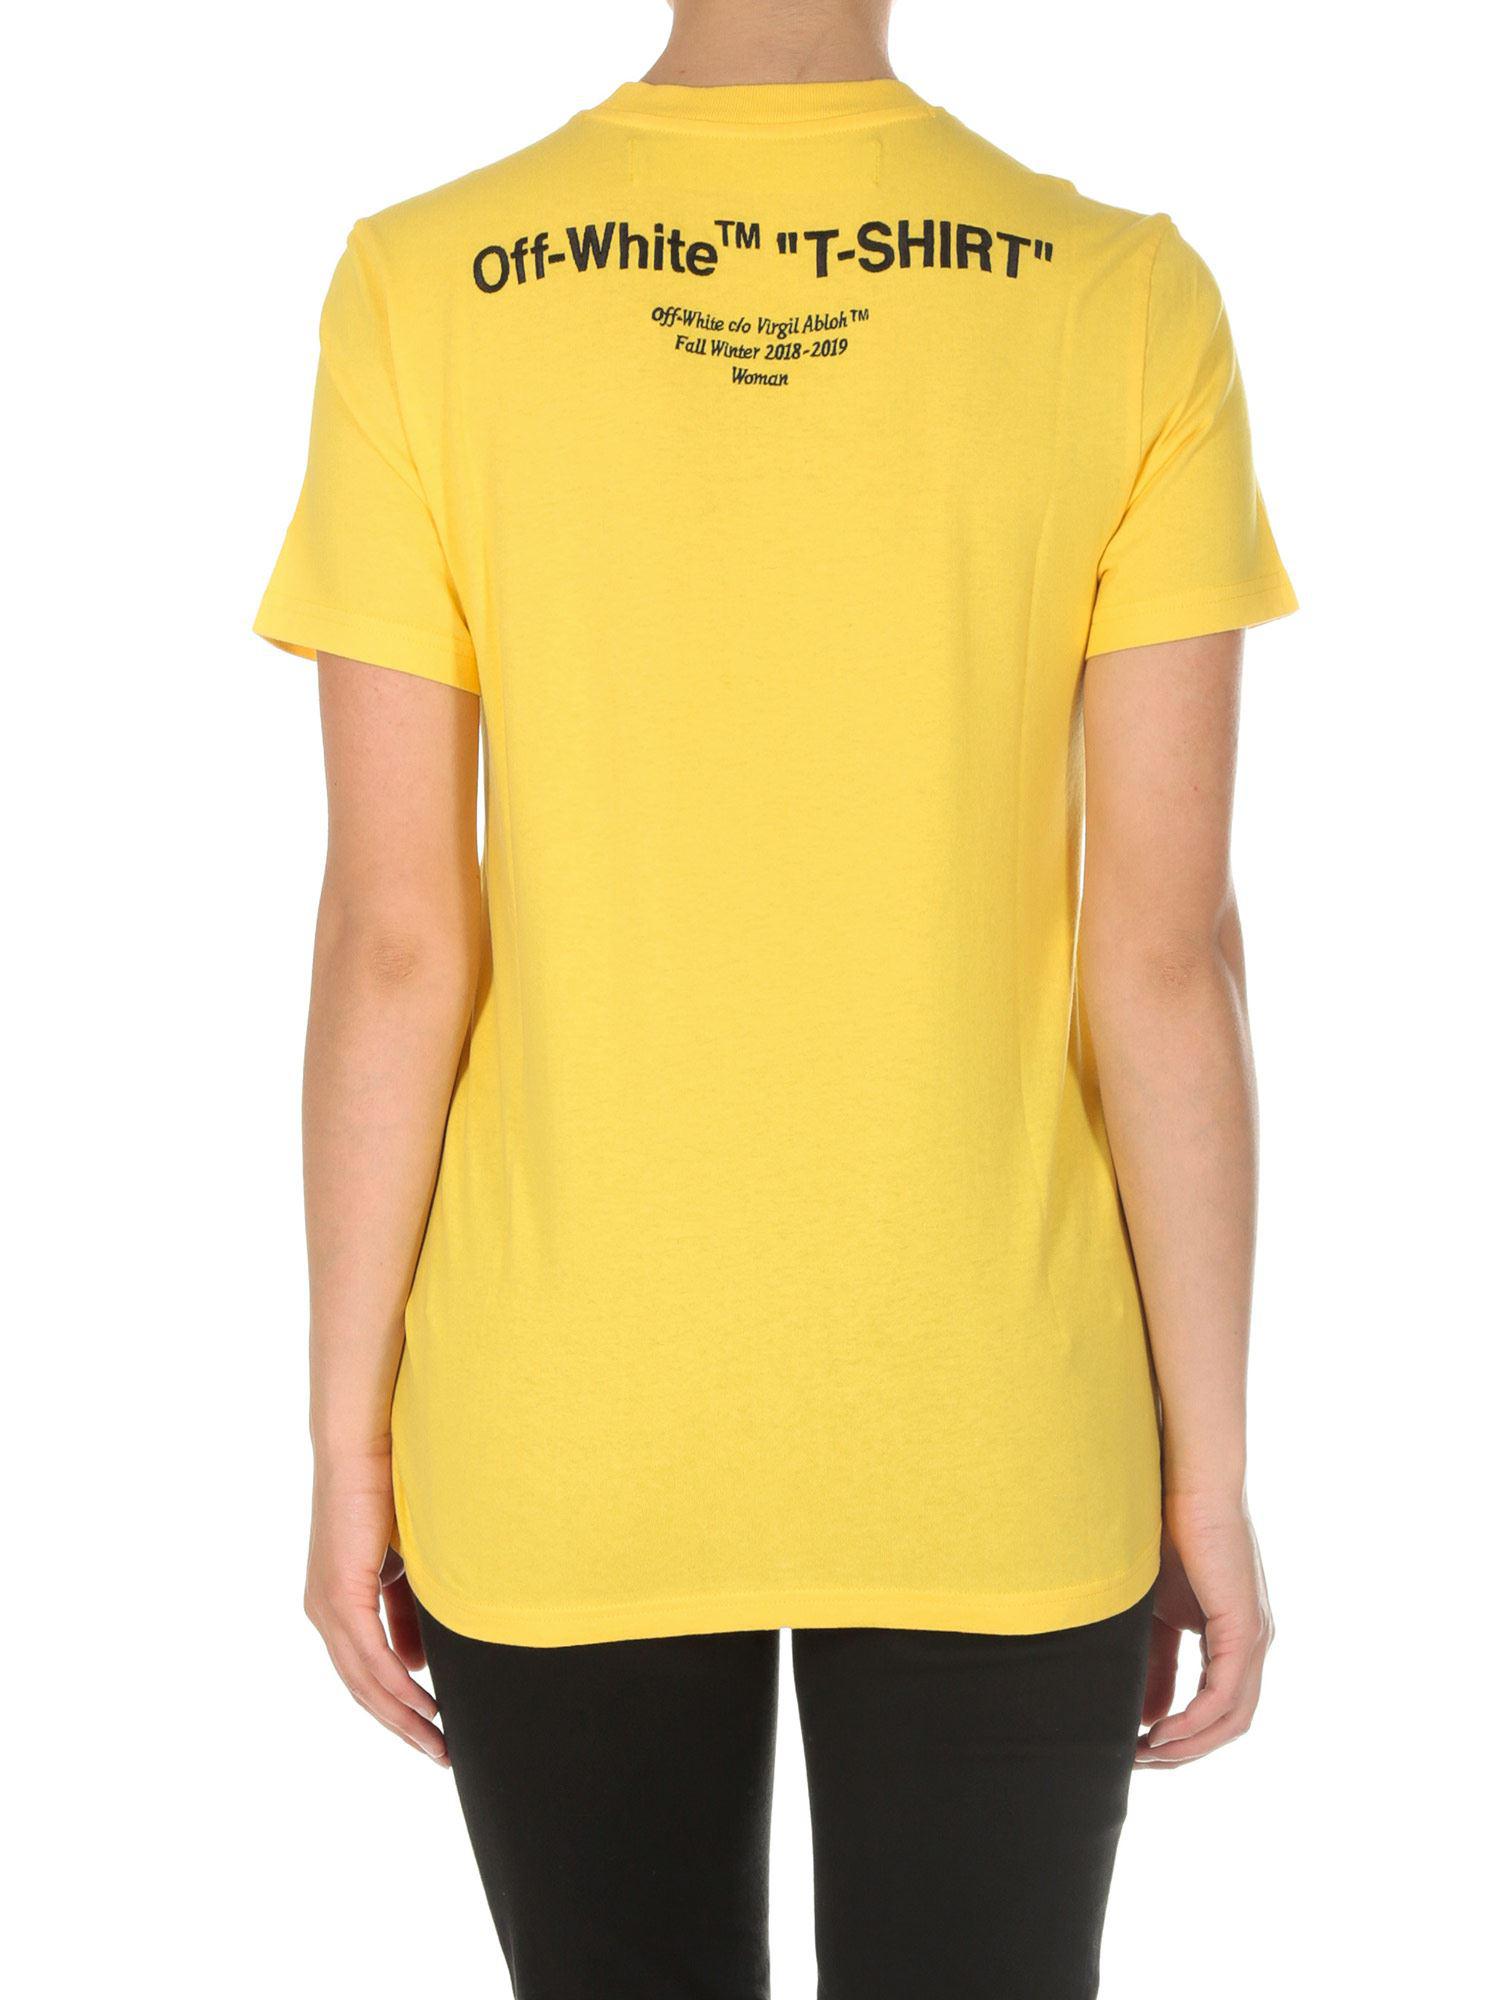 Purchase > off white t shirt yellow